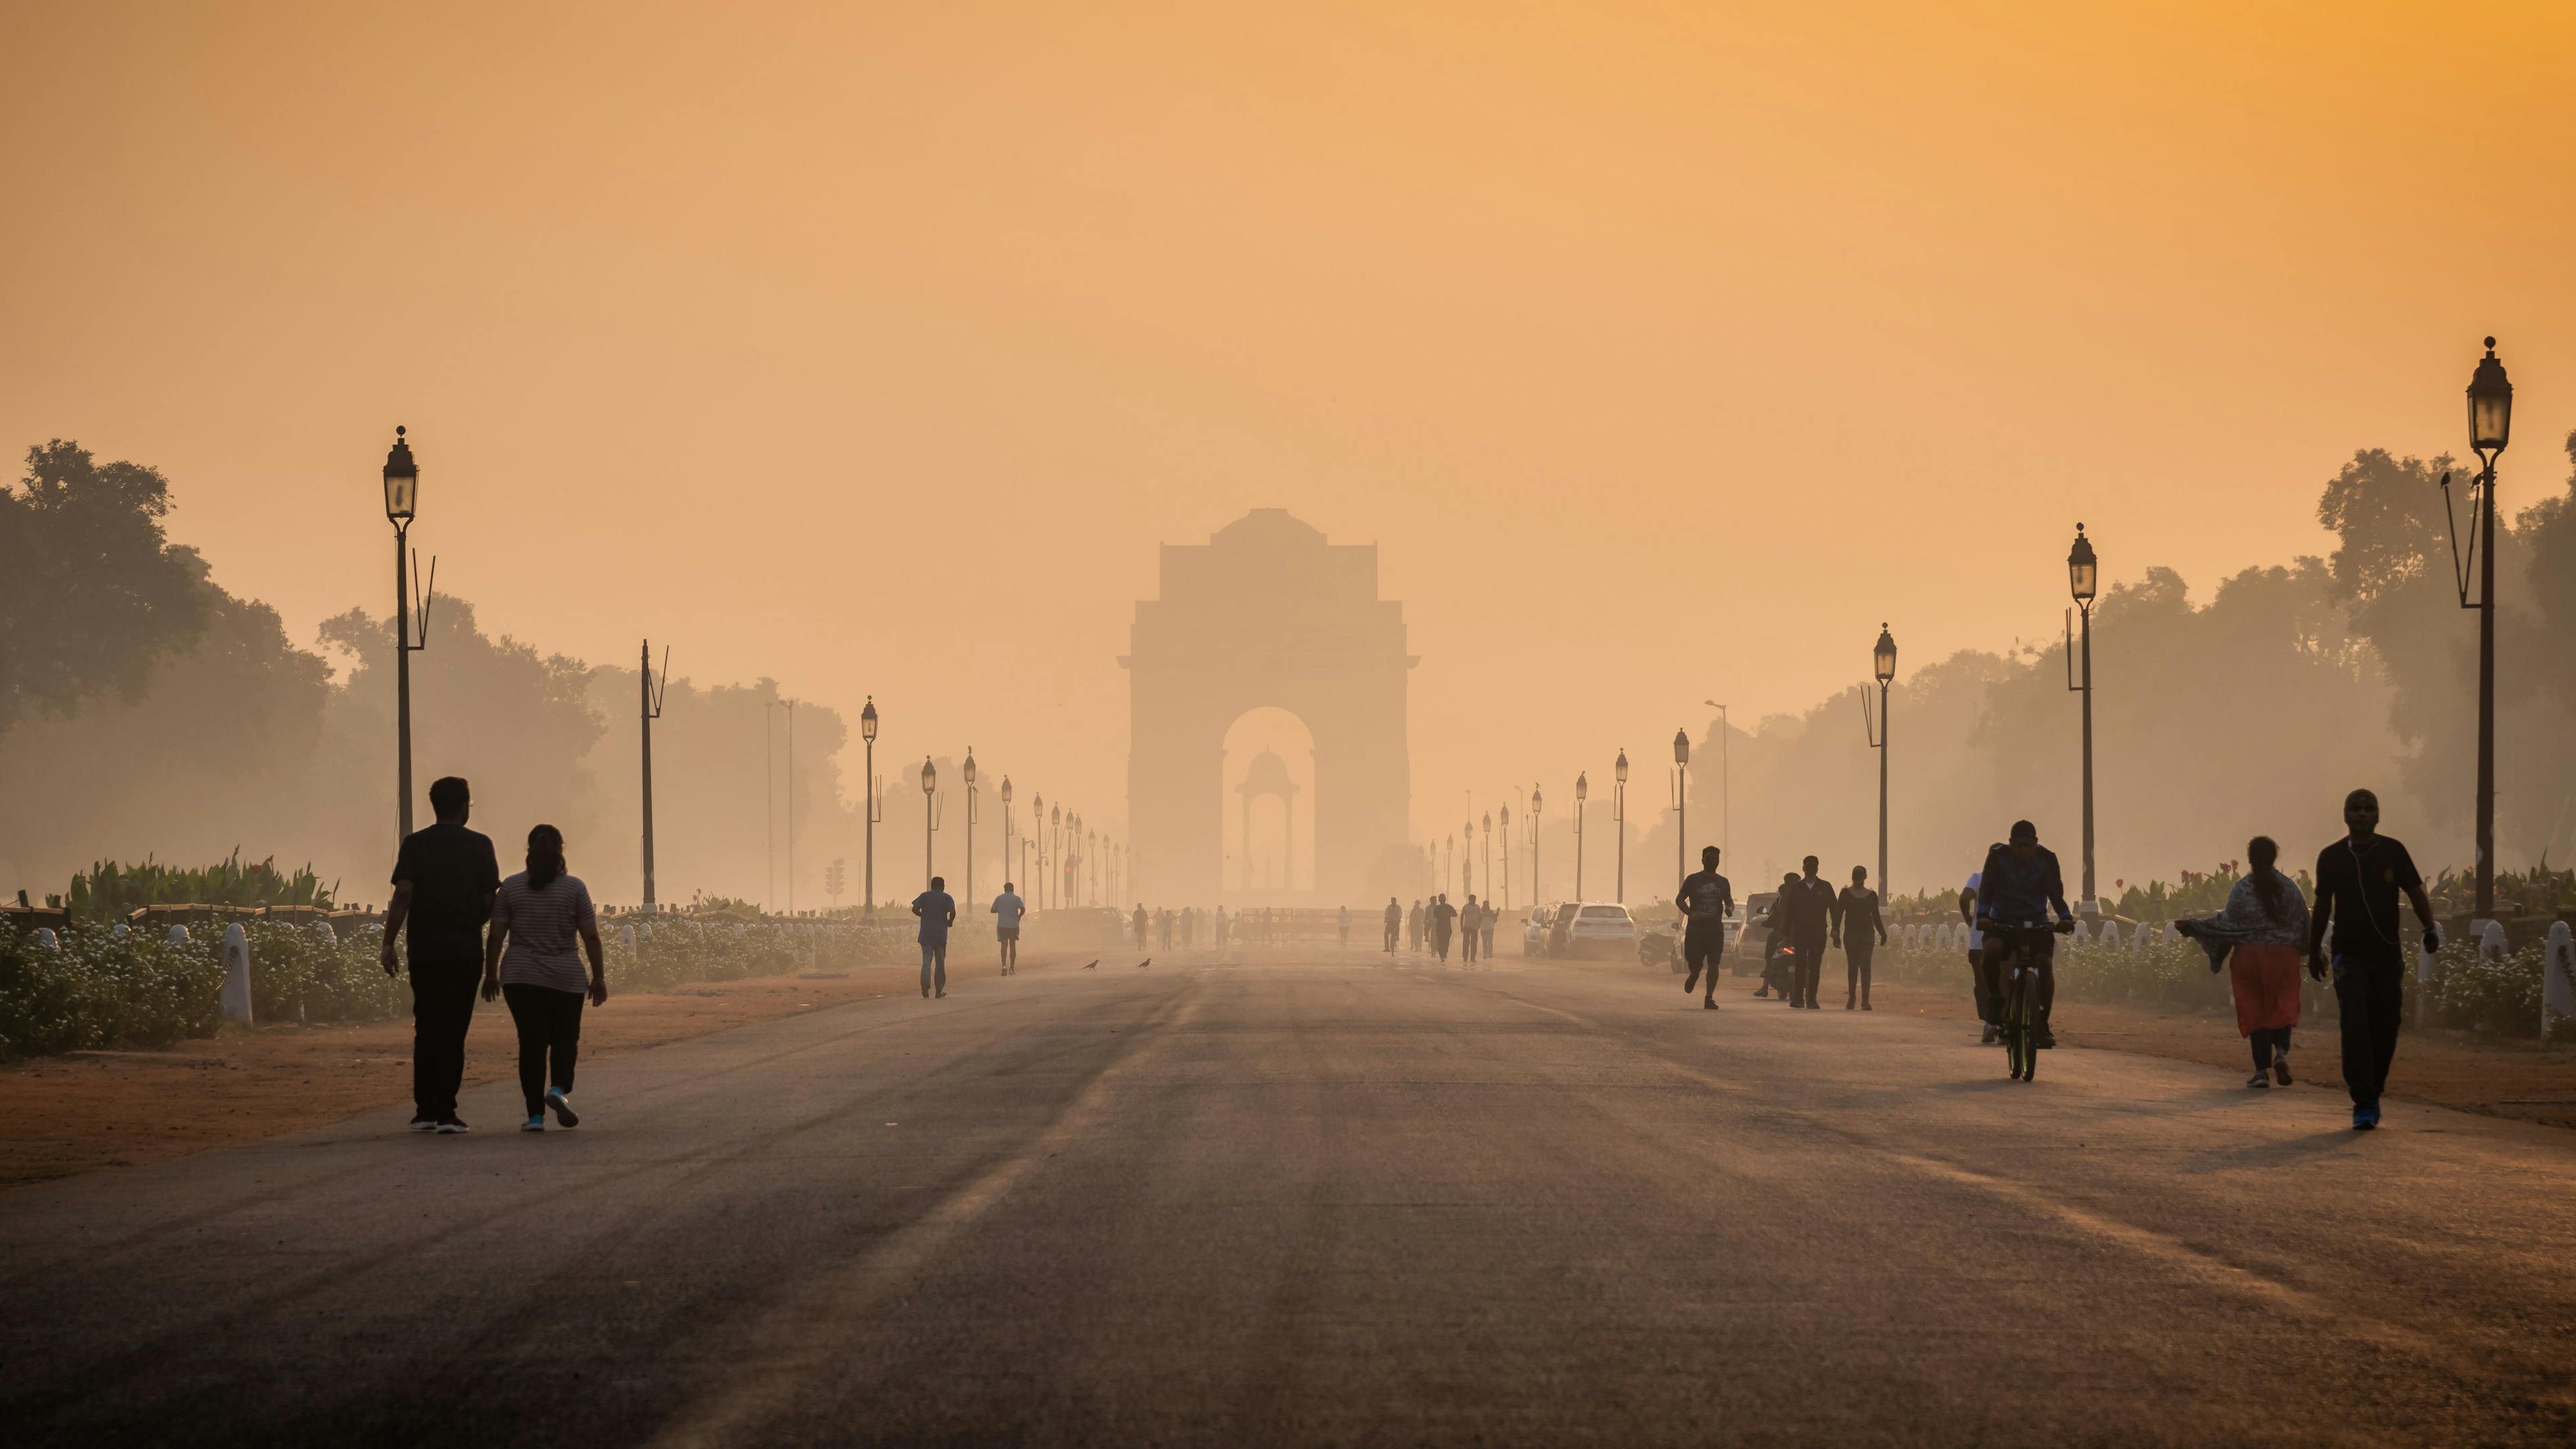 Silhouette of triumphal arch architectural style war memorial during hazy morning. Pollution level rises and causes smog in autumn season due stagnant winds. | Image Credit: © anjali04 - © anjali04 - stock.adobe.com